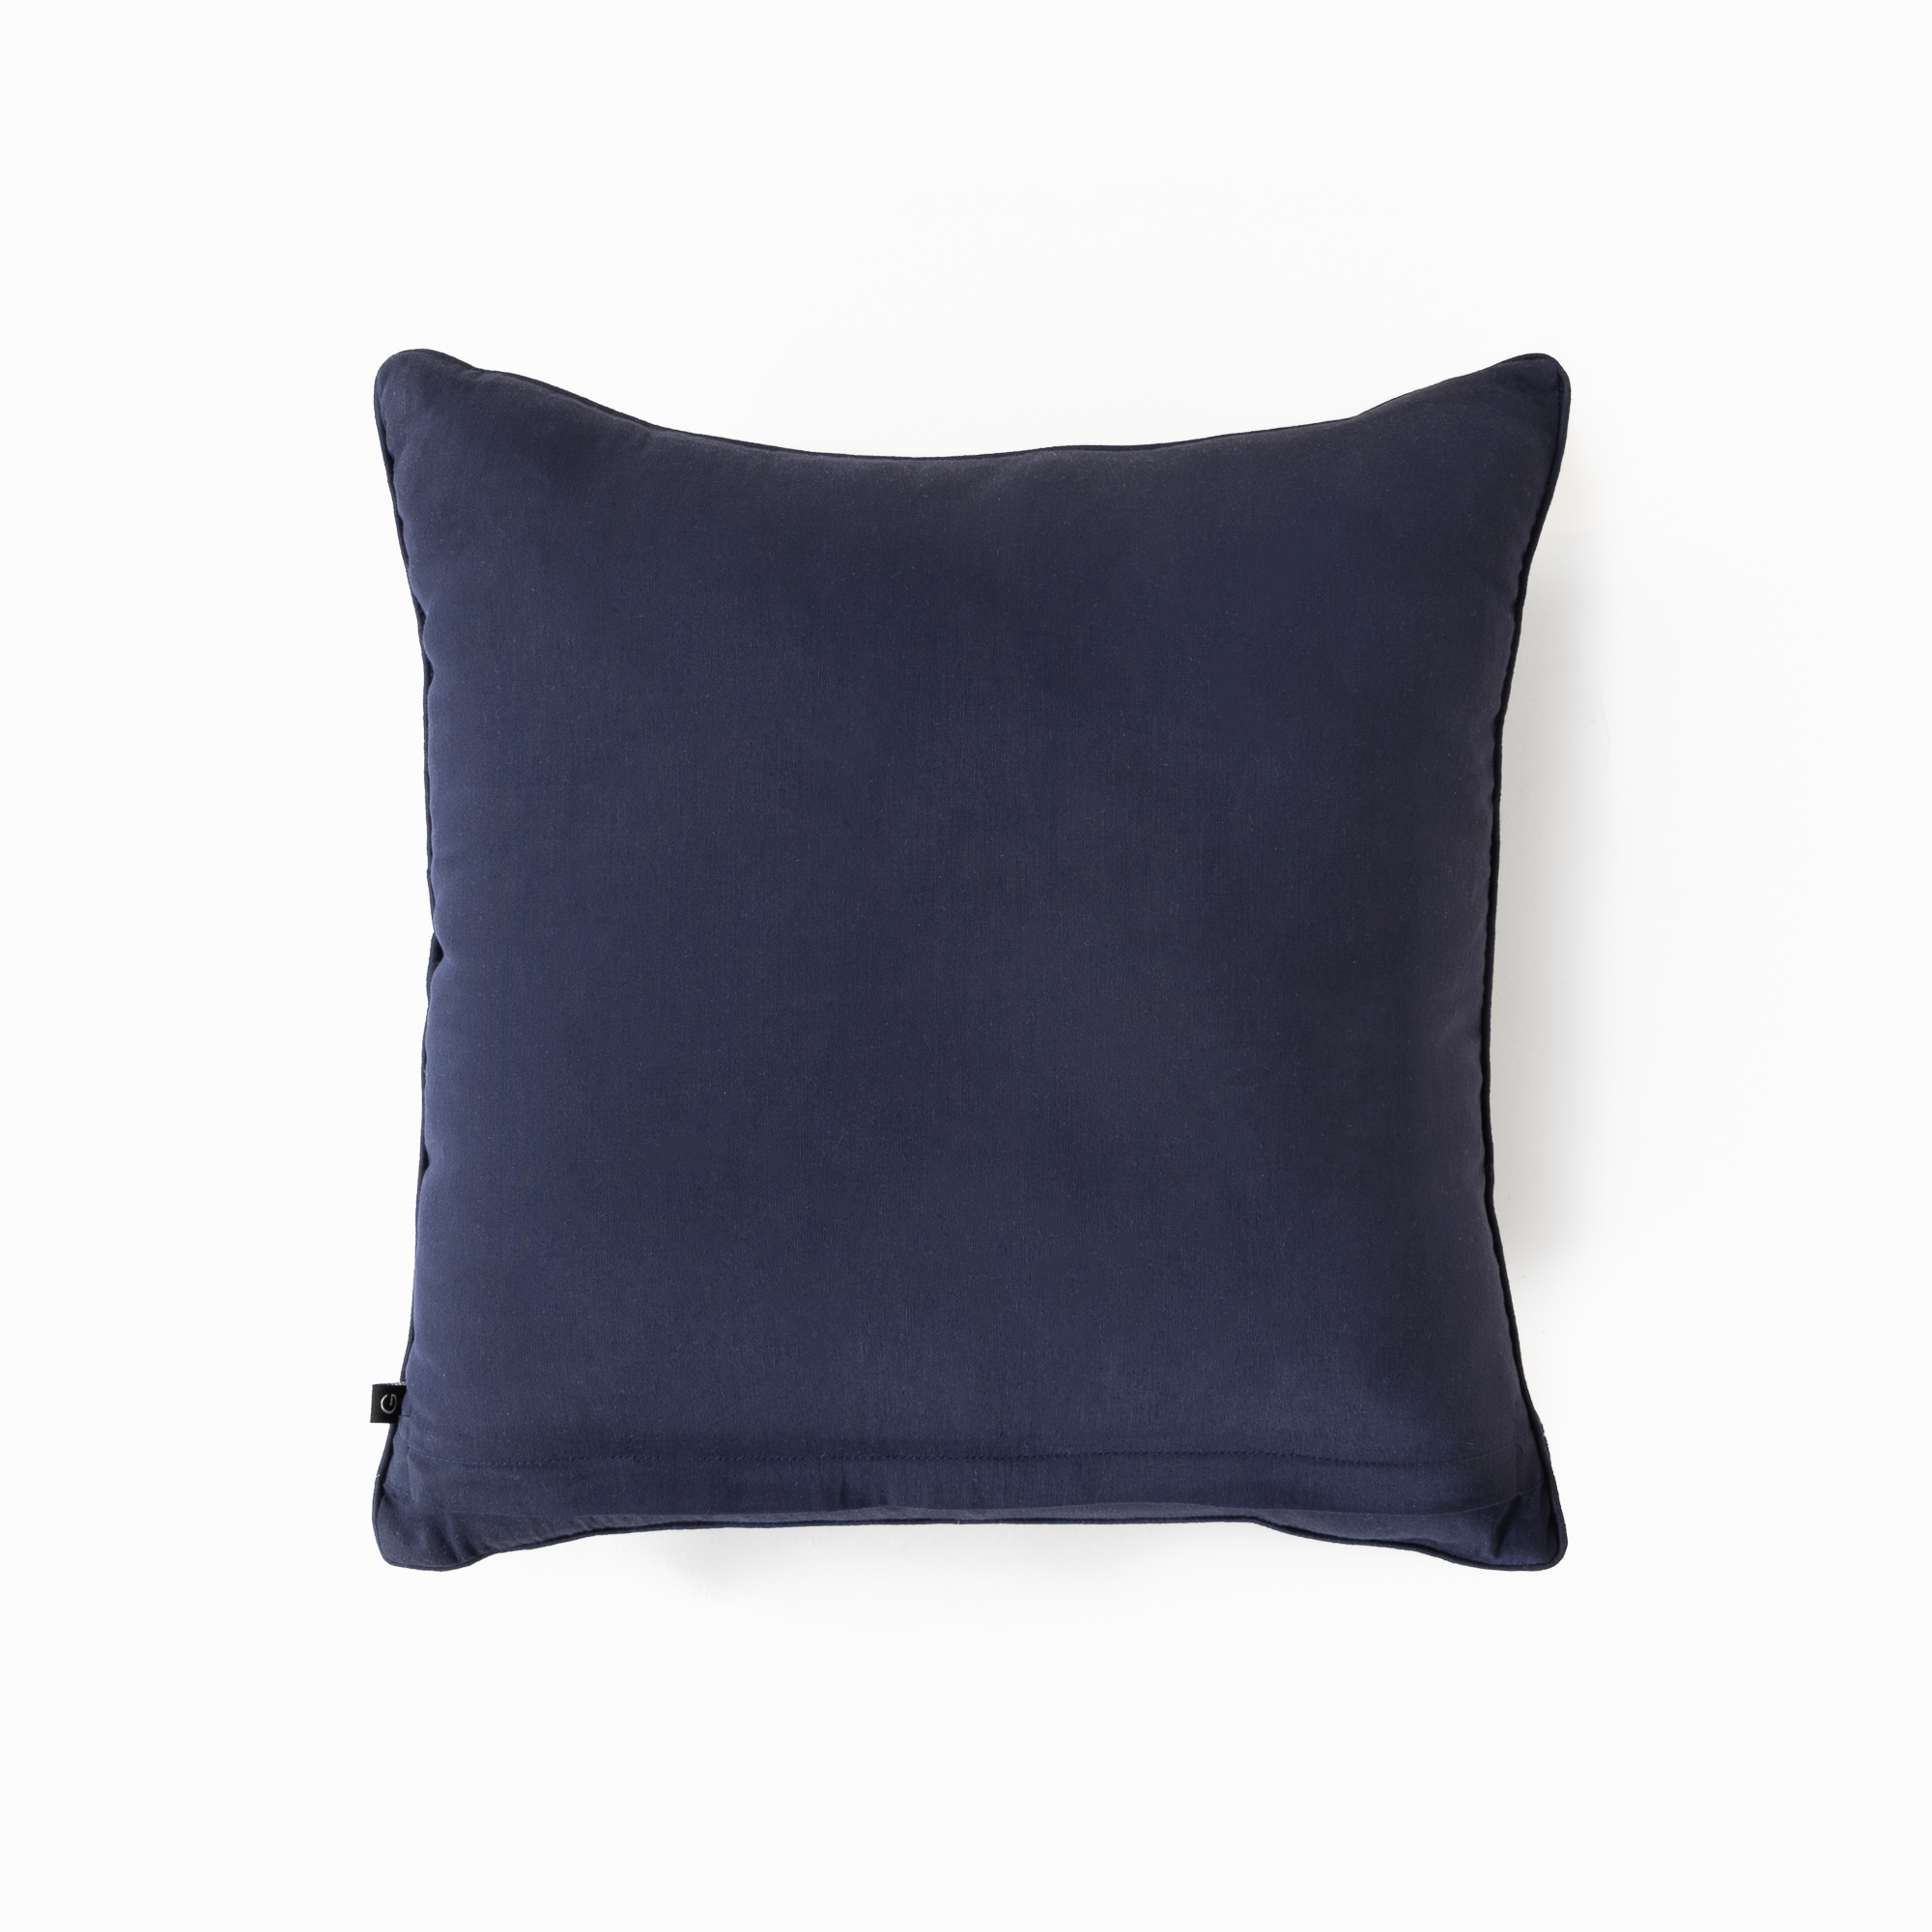 The Nightingale Cushion Cover